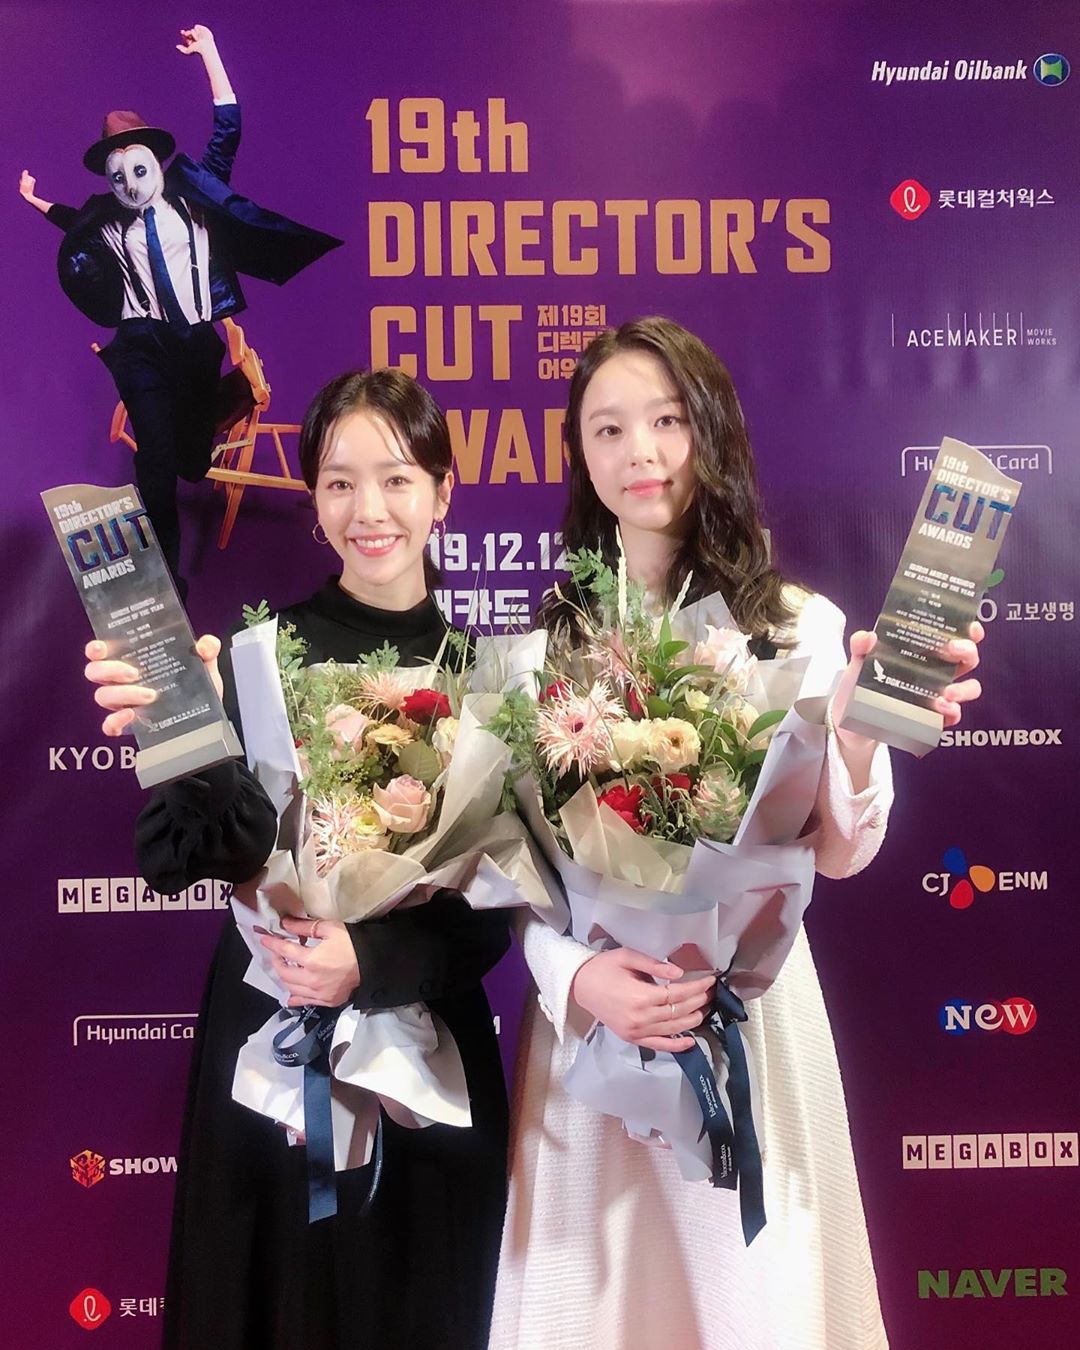 ..Bloody Goddess BeautyHan Ji-min has released a photo of him with Park Ji Hu.Actor Han Ji-min said on his instagram on the 12th, The time of fun and laughter. Thank you.I would like to express my gratitude to Kim Tae-ri Actor # Sung Si-heup, who introduced Mitsubak with a touching comment.# Directors Cut Awards # Mitsubac movie # With the #Park Ji Hu Actor of the hummingbird and posted a picture.In the photo, the 19th Directors Cut Awards held a trophy with his junior Park Ji Hu and Celebratory photoHan Ji-min, who is taking pictures, is filled with a bright smile and a pure visual that captivates netizens.Meanwhile, Han Ji-min won the Womens Actor of the Year award for the movie Mitsubac at the 19th Directors Cut Awards.Photo: Han Ji-min Instagram